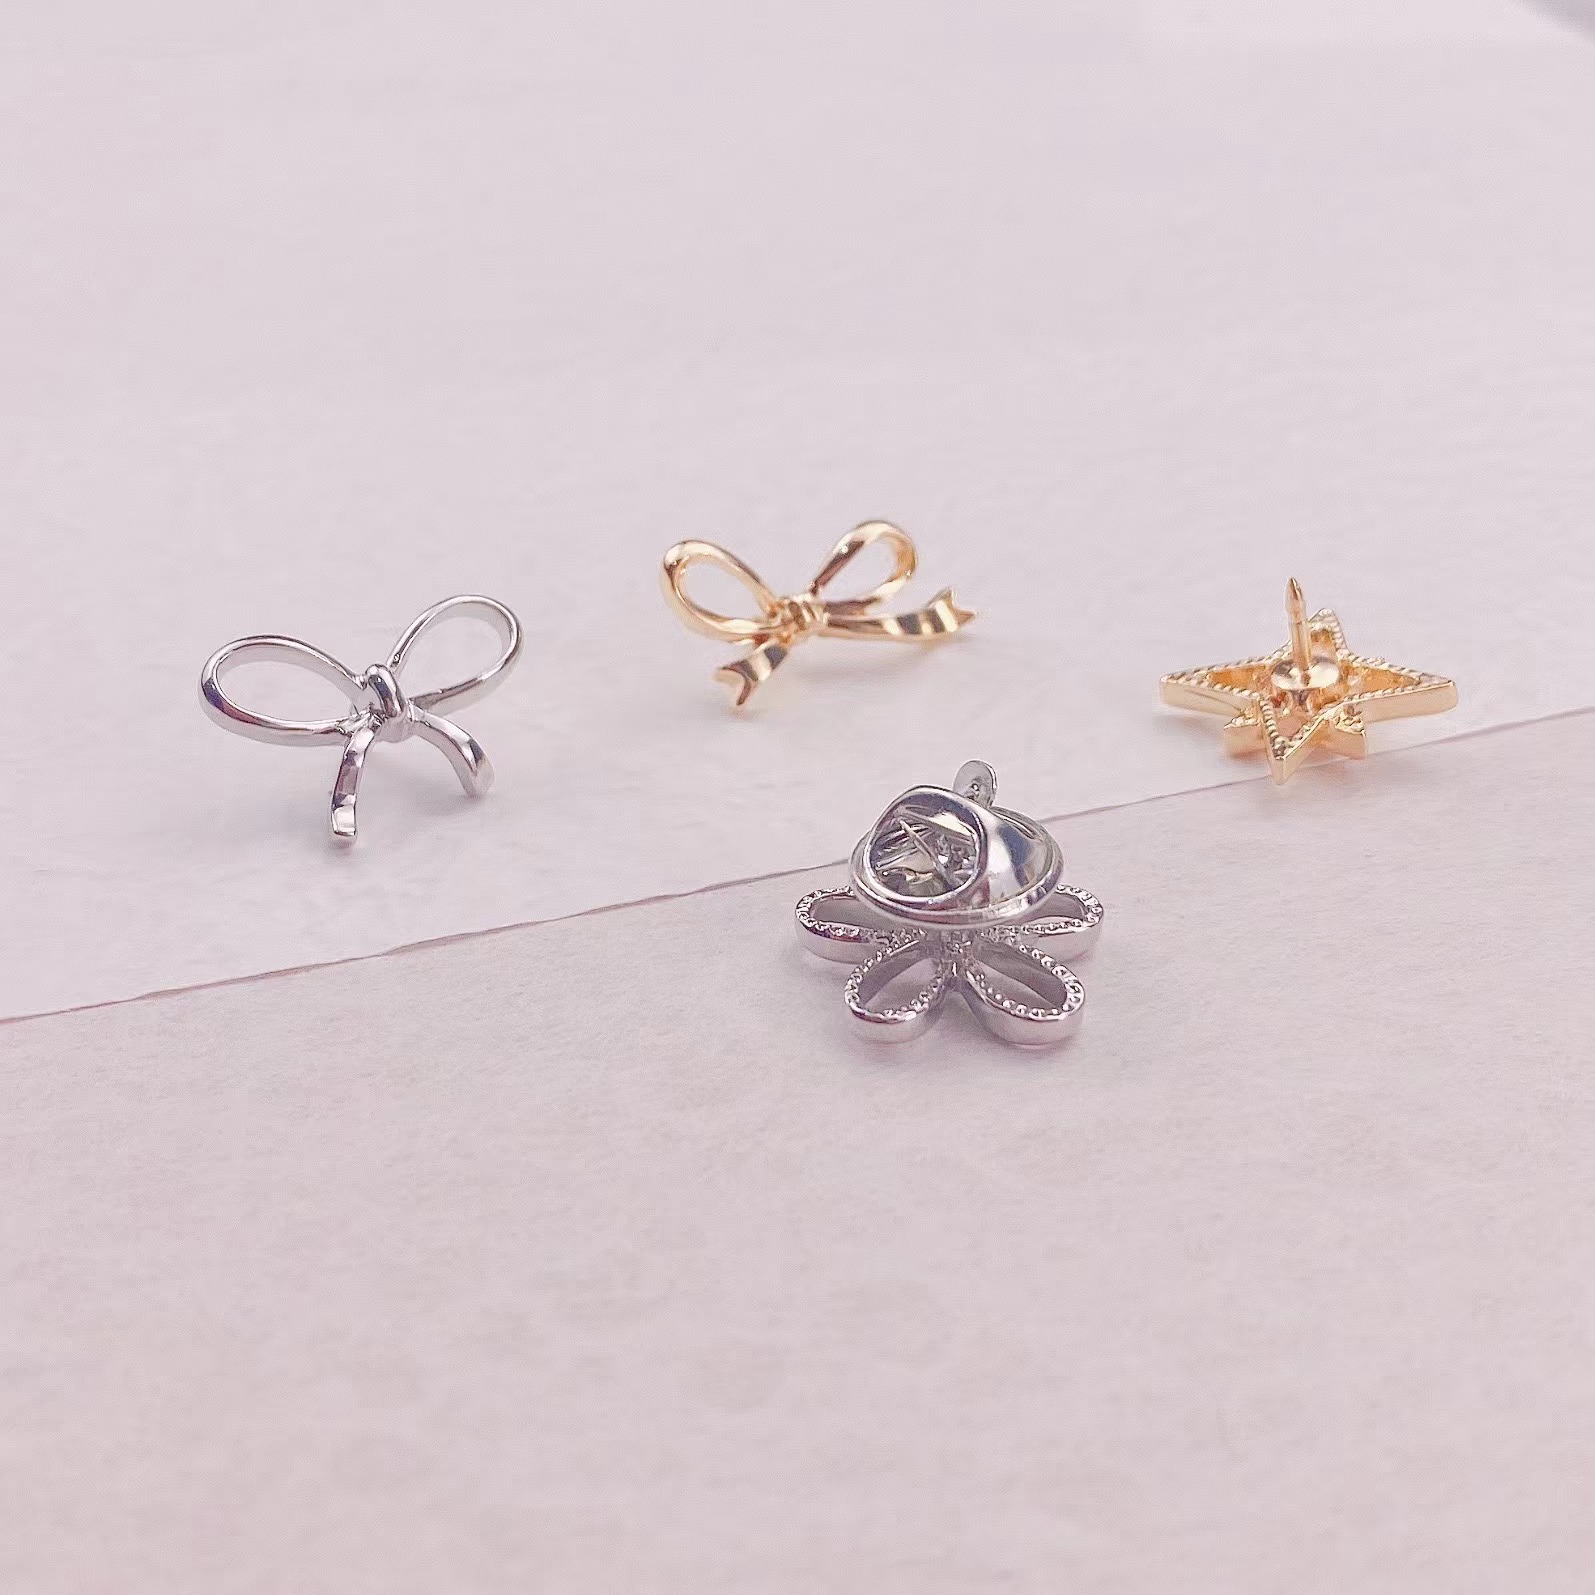 Anti-Exposure Button Mini Brooch All-Match Neckline Chest Fixed Clothes Snap-Fit Pin Pin Anti-Exposure Accessories